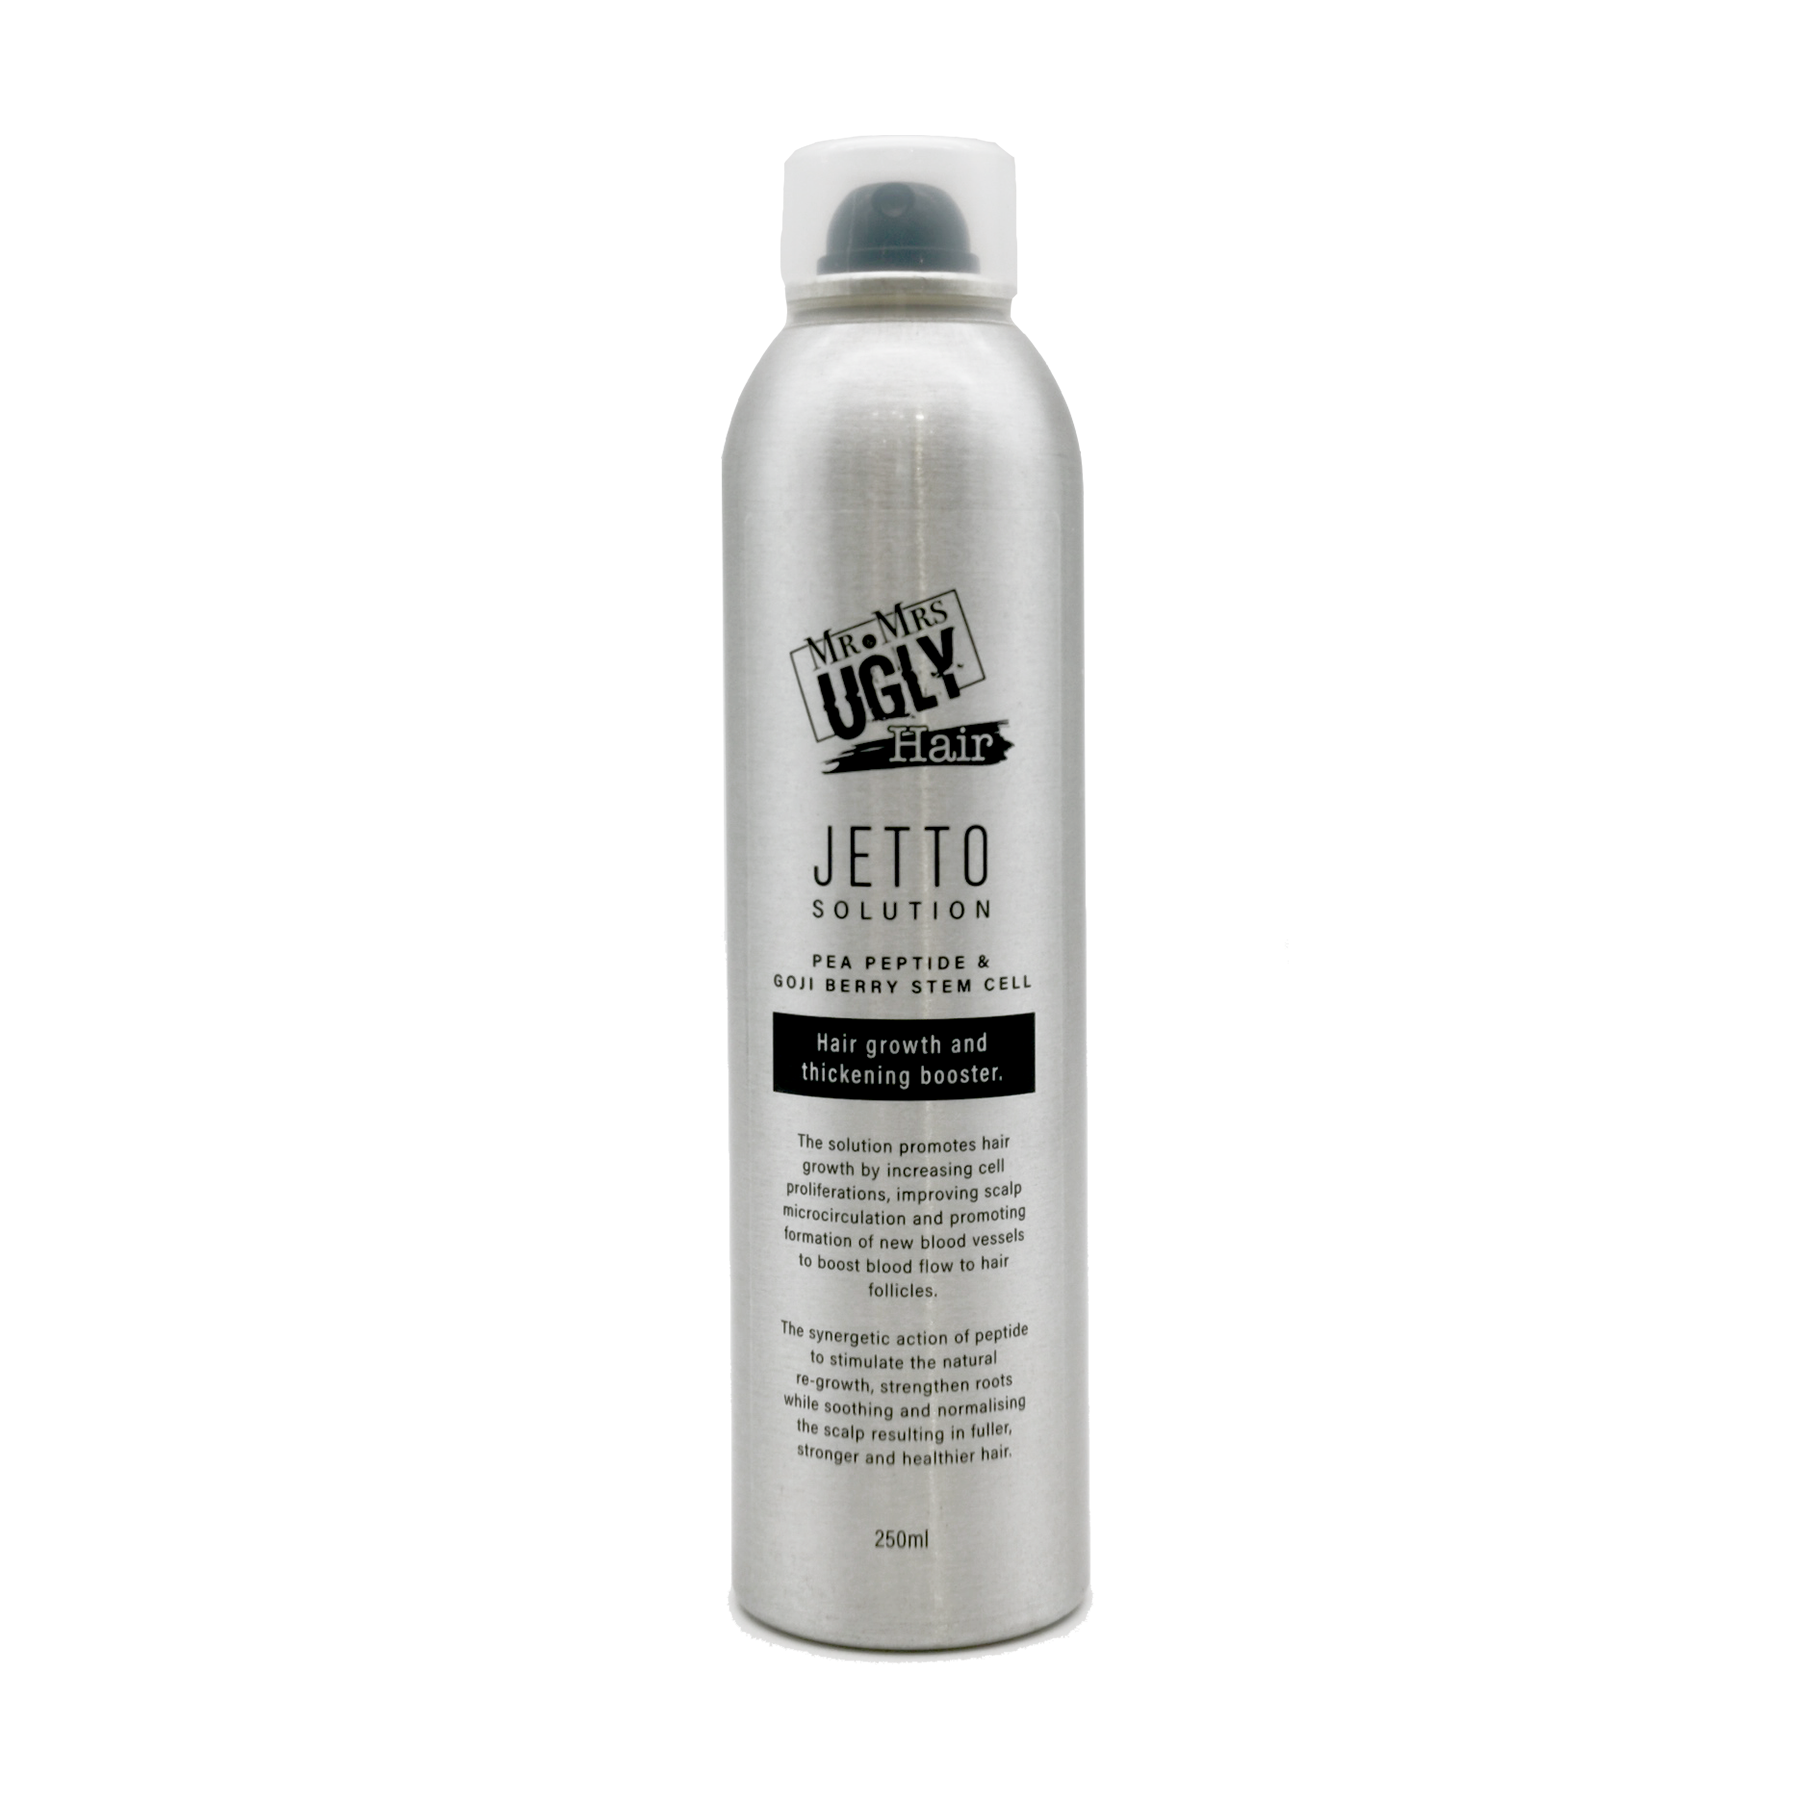 Mr & Mrs Ugly - Jetto Solution - Hair Growth & Thickening Booster